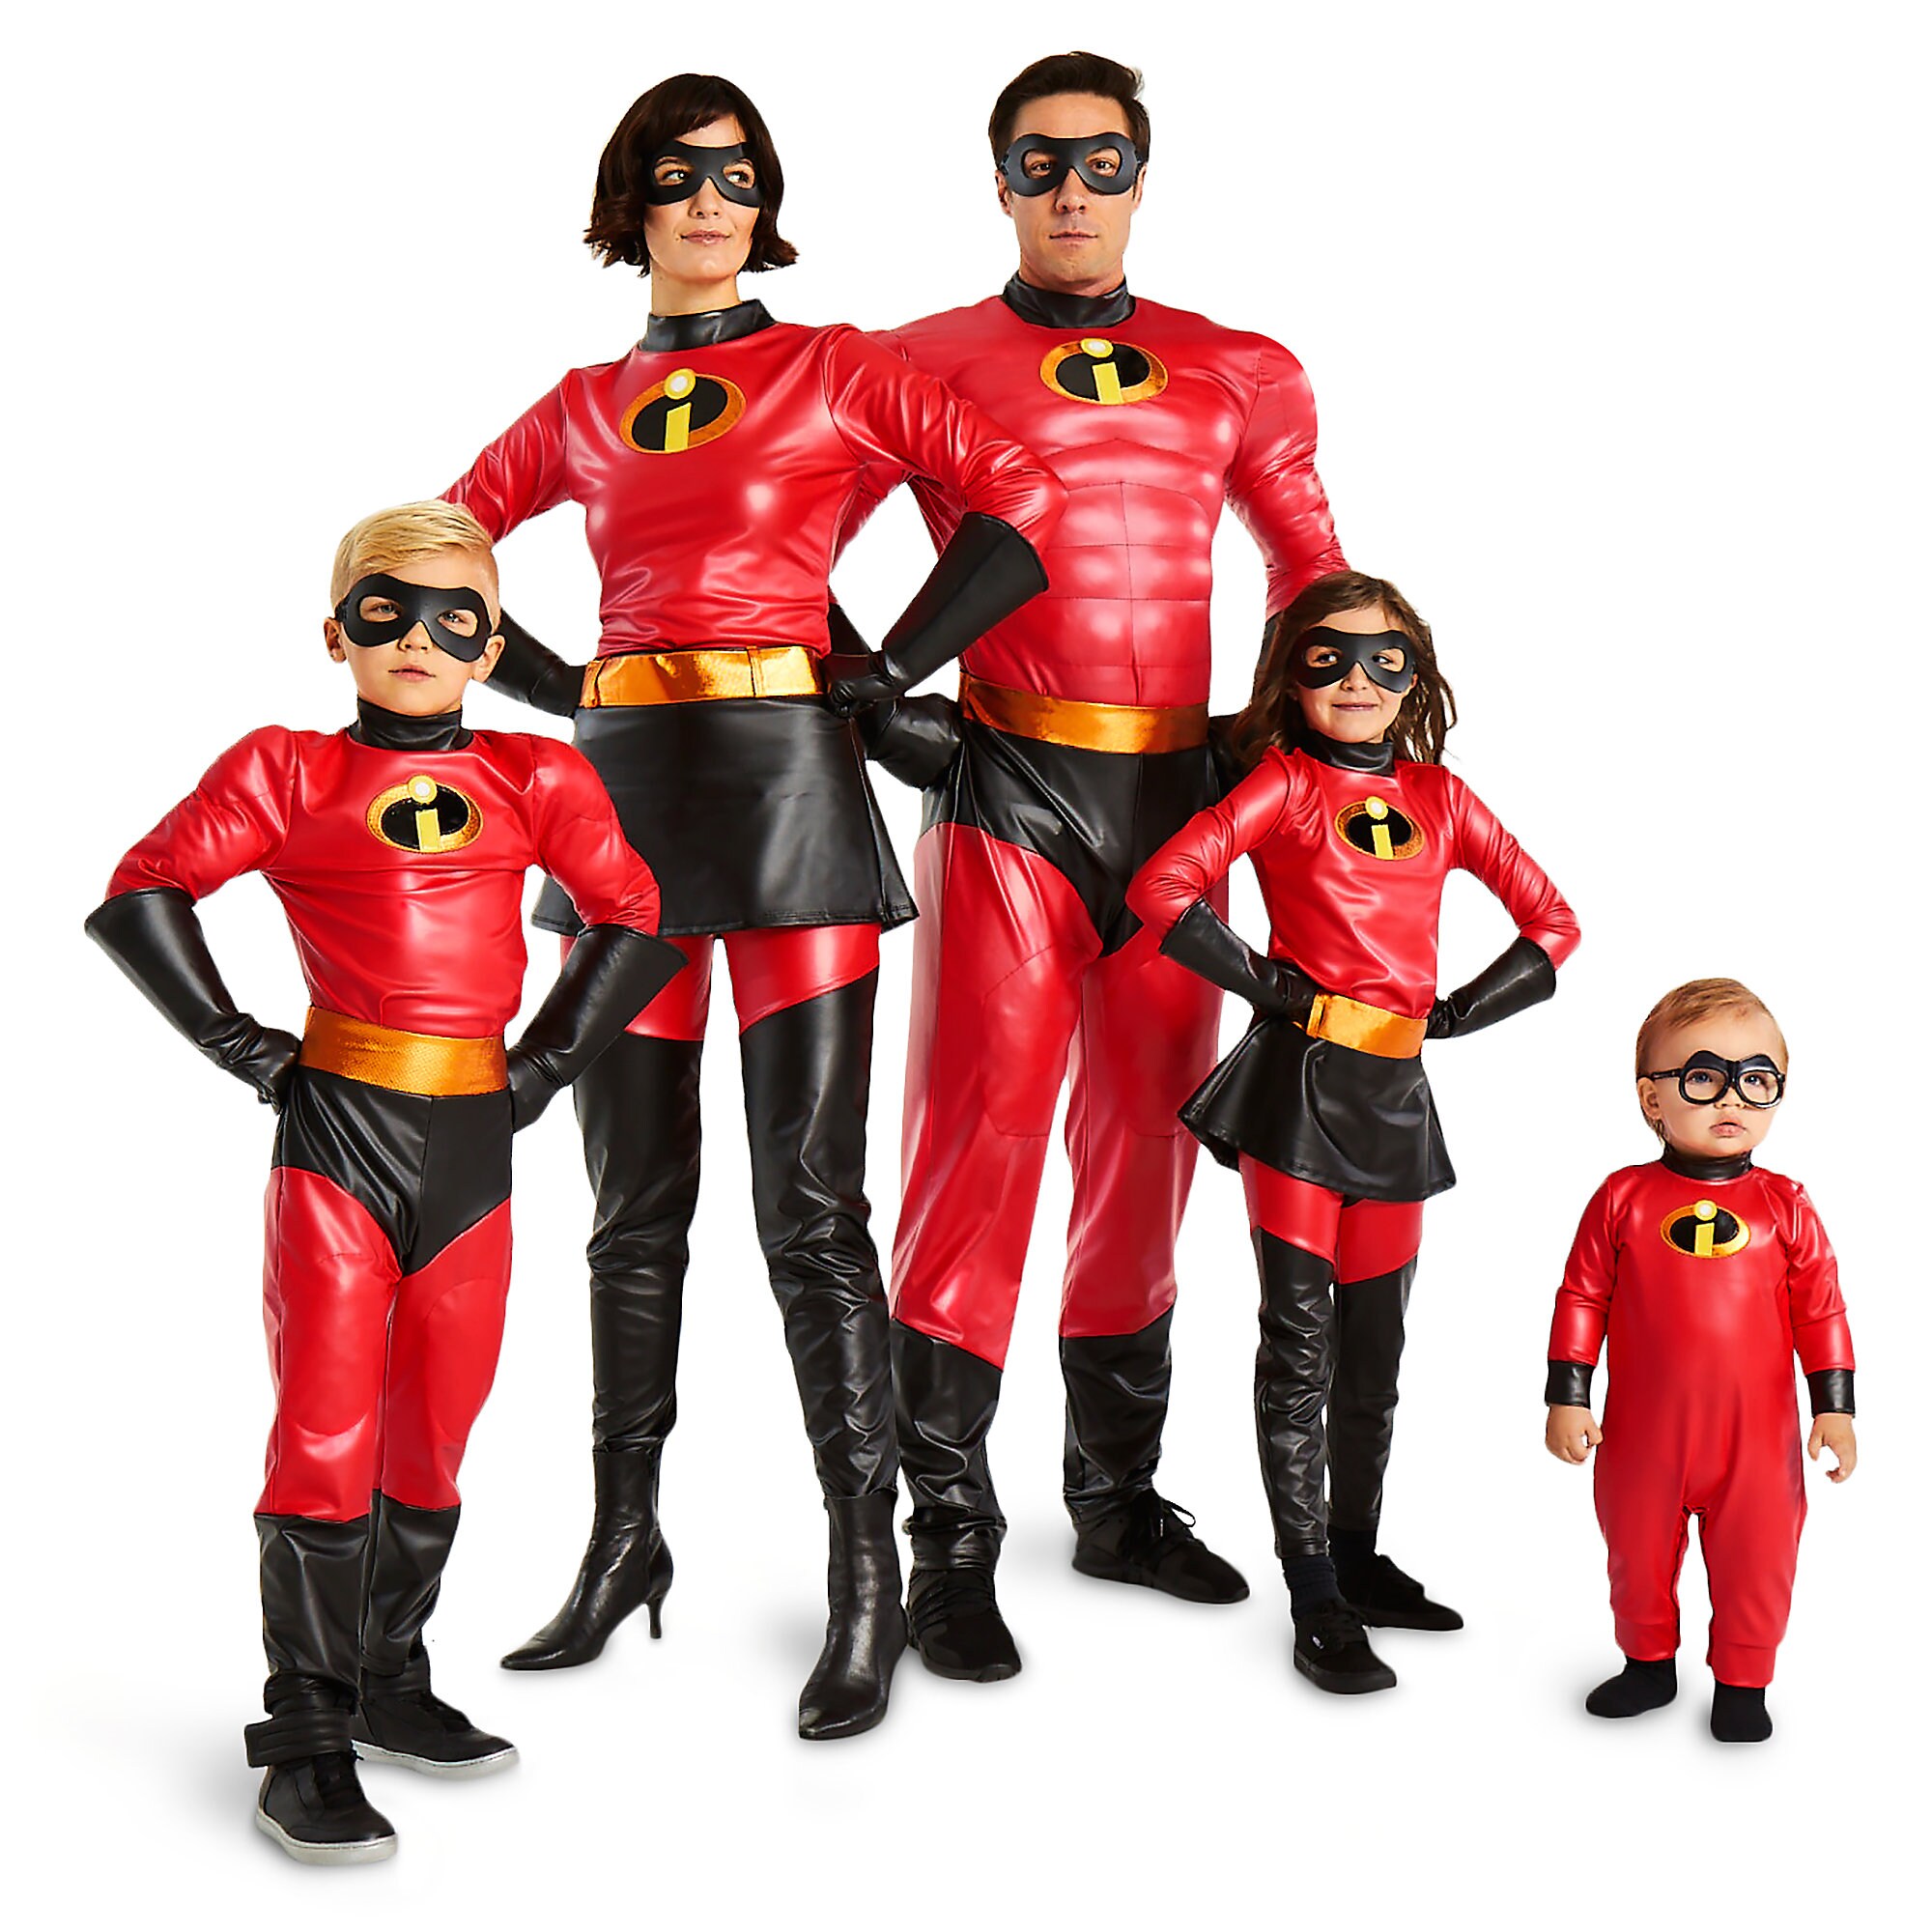 Jack-Jack Costume for Baby - Incredibles 2